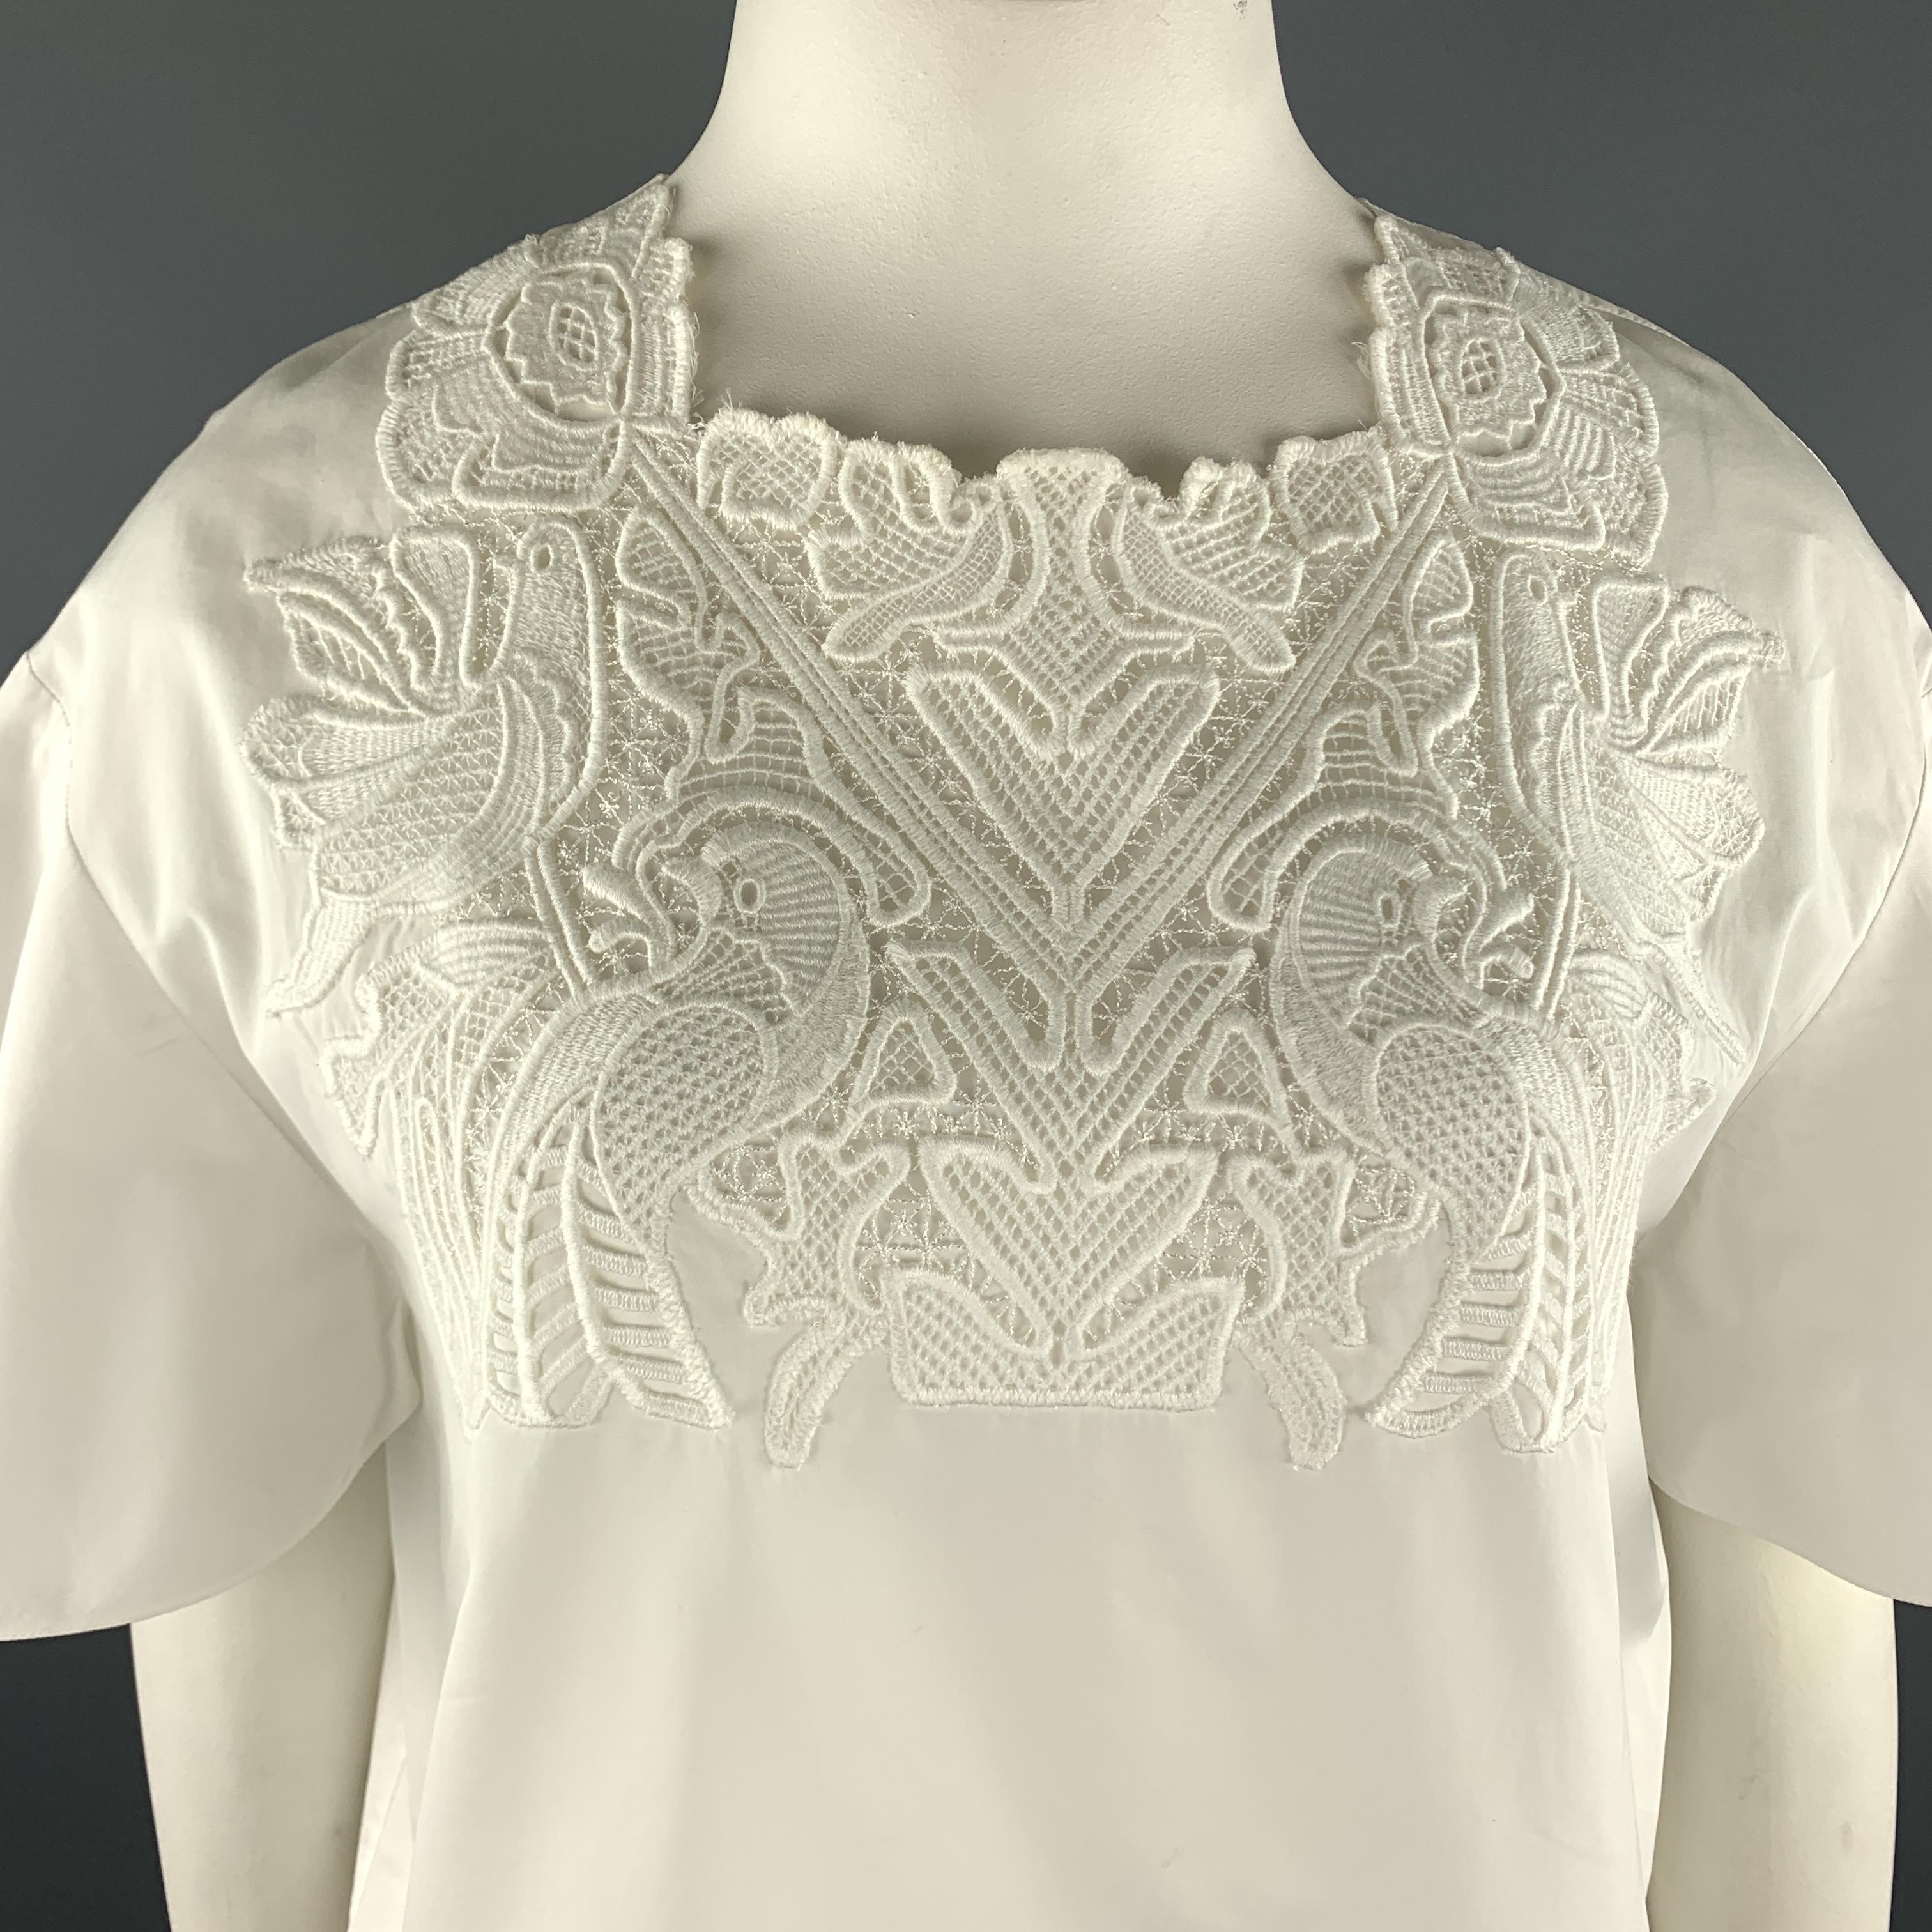 CHLOE top comes in white cotton poplin with a squared, lace embroidered collar, and short ruffled sleeves. Made in France.

Excellent Pre-Owned Condition.
Marked: FR 42

Measurements:

Shoulder: 22 in.
Bust: 44 in.
Sleeve: 8.5 in.
Length: 25 in.